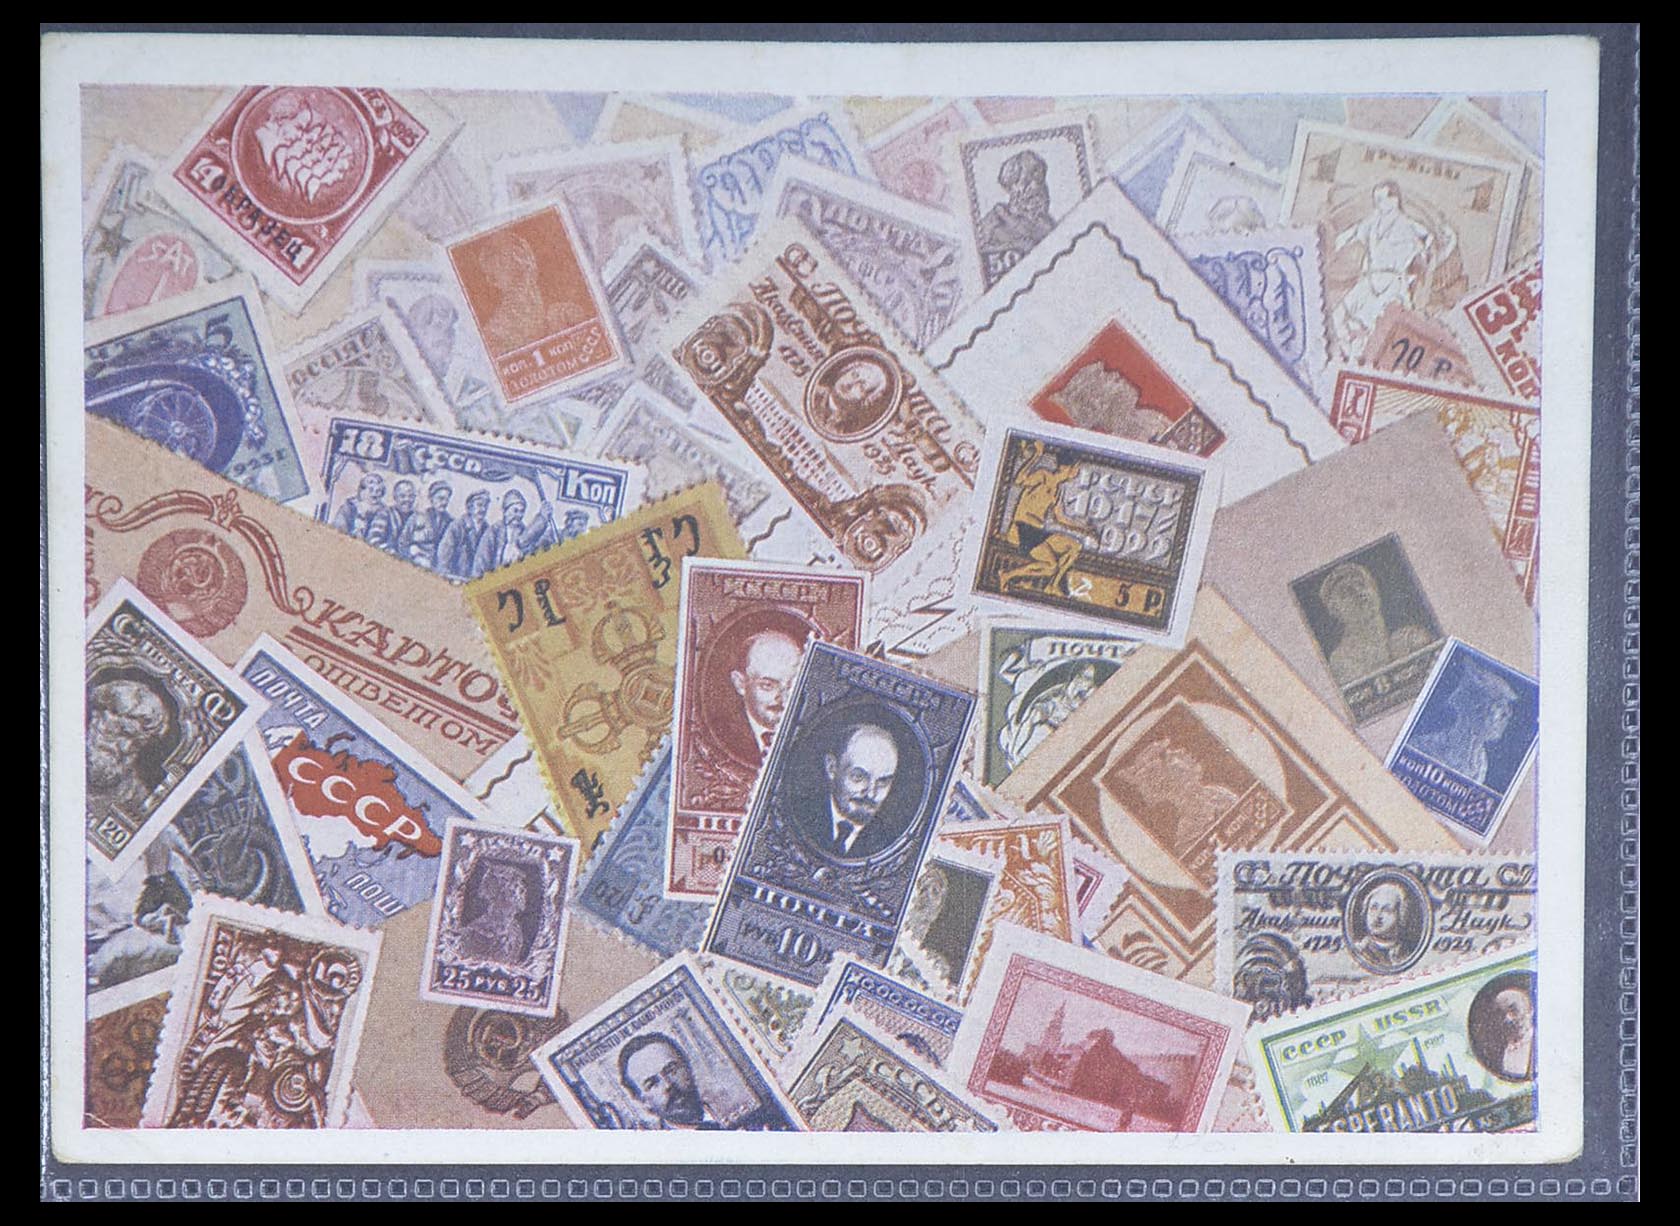 33331 024 - Stamp collection 33331 Zeppelin covers 1929-1931.